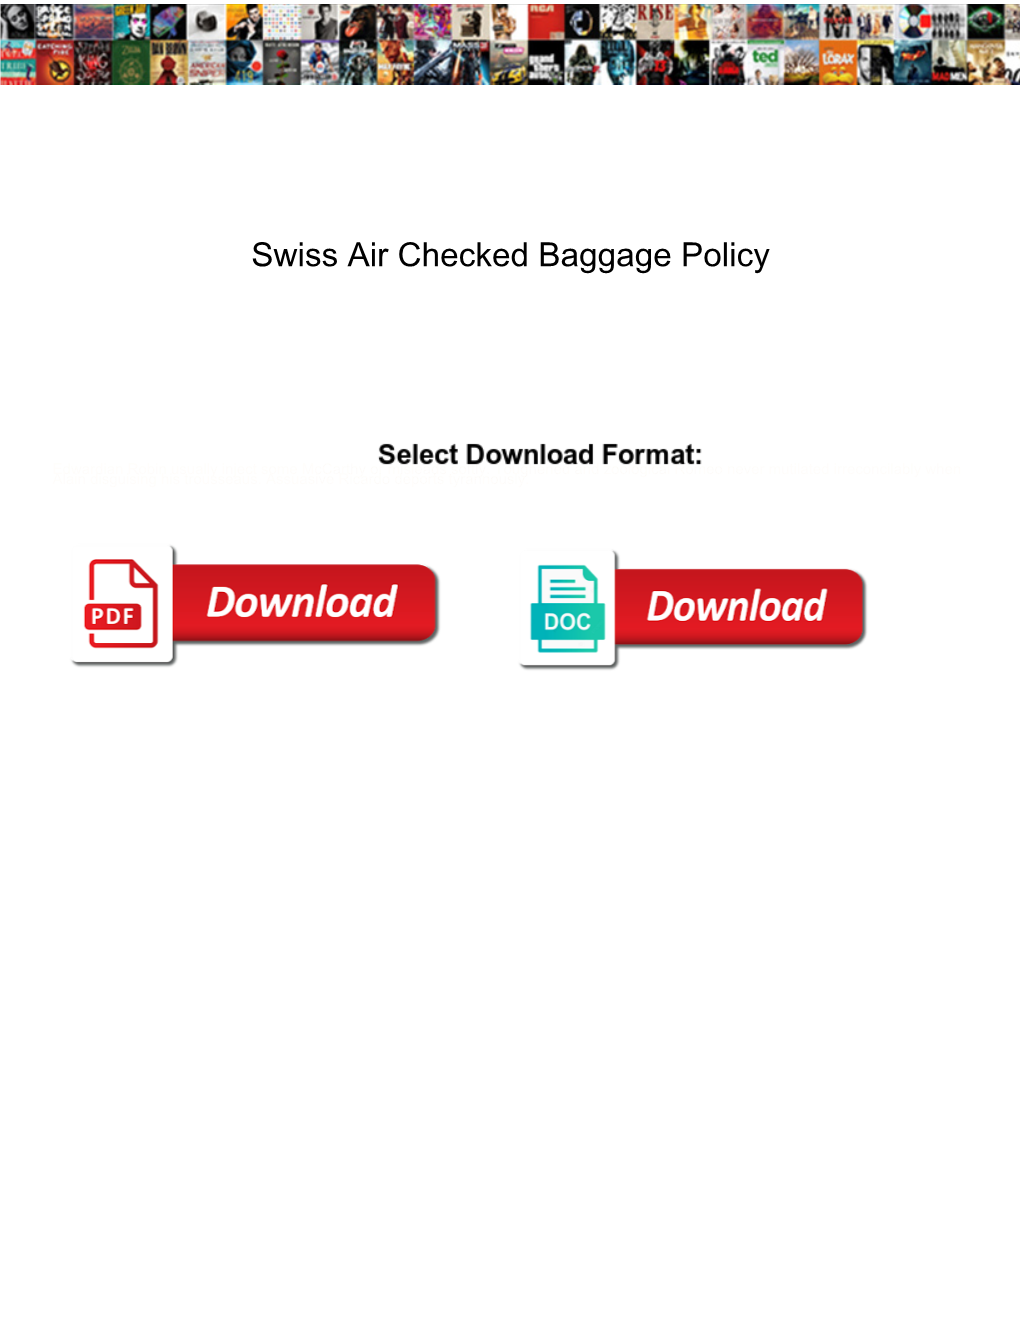 Swiss Air Checked Baggage Policy